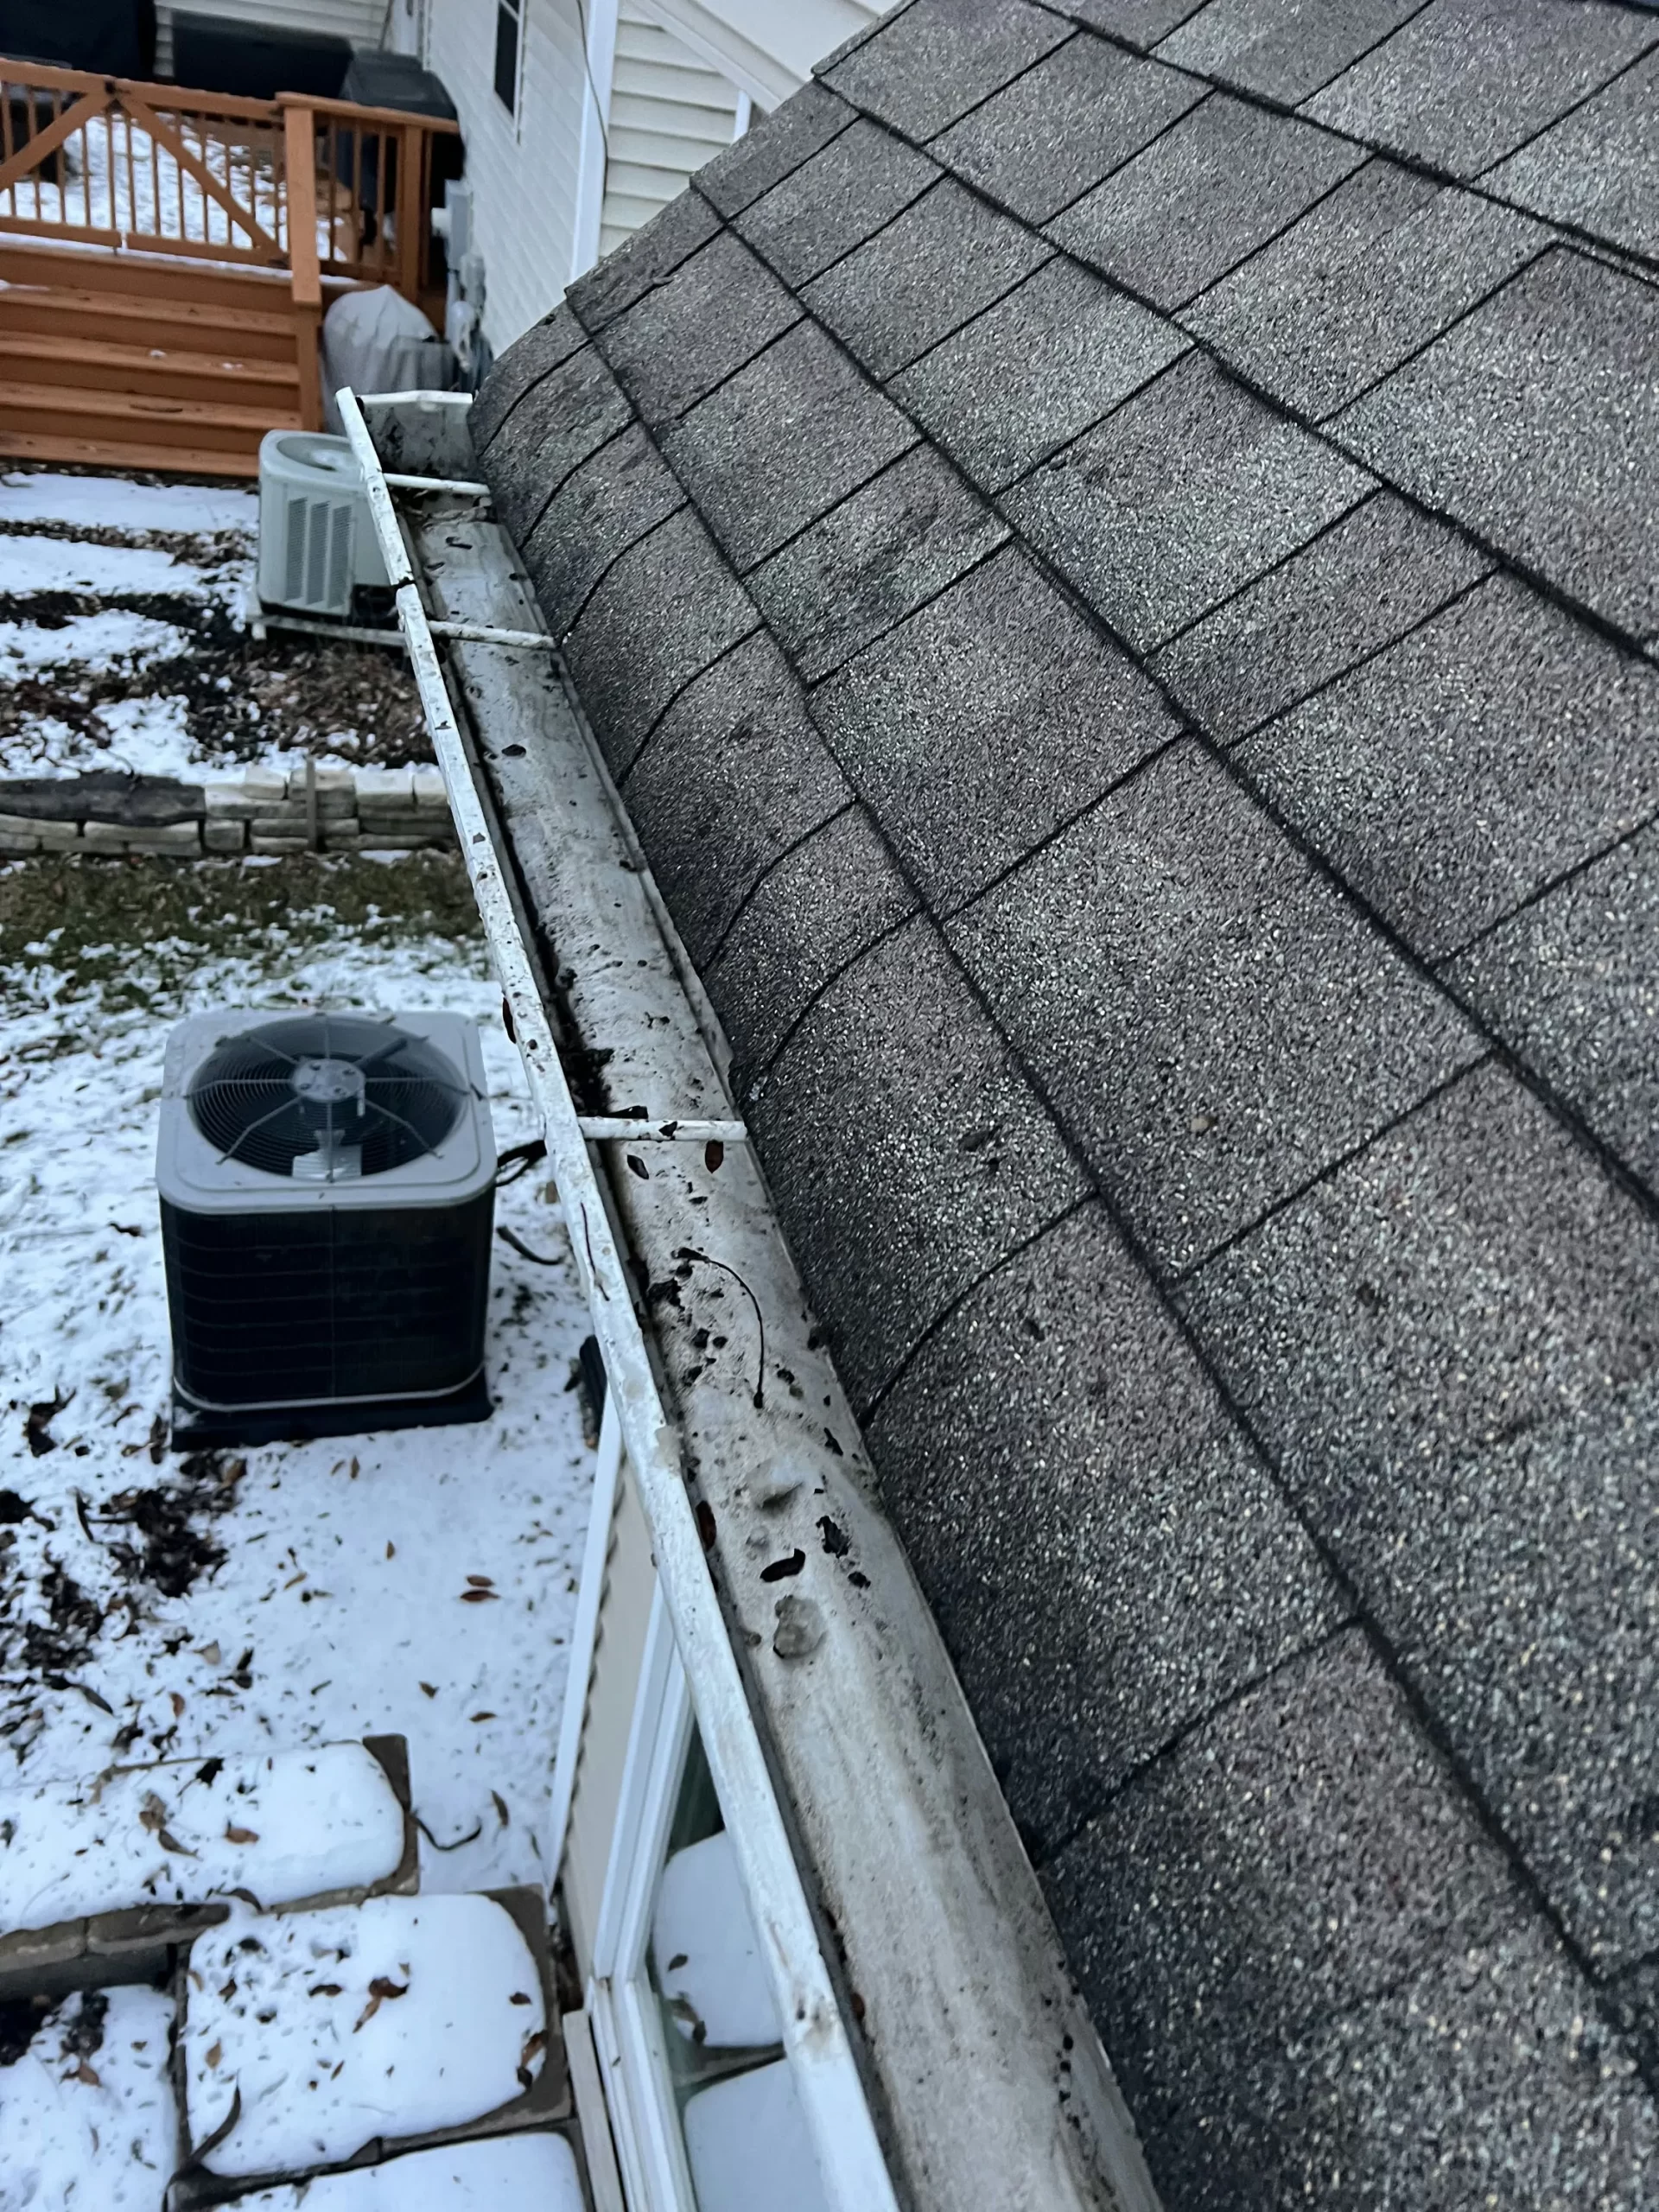 Should You Clean Your Gutters in Winter